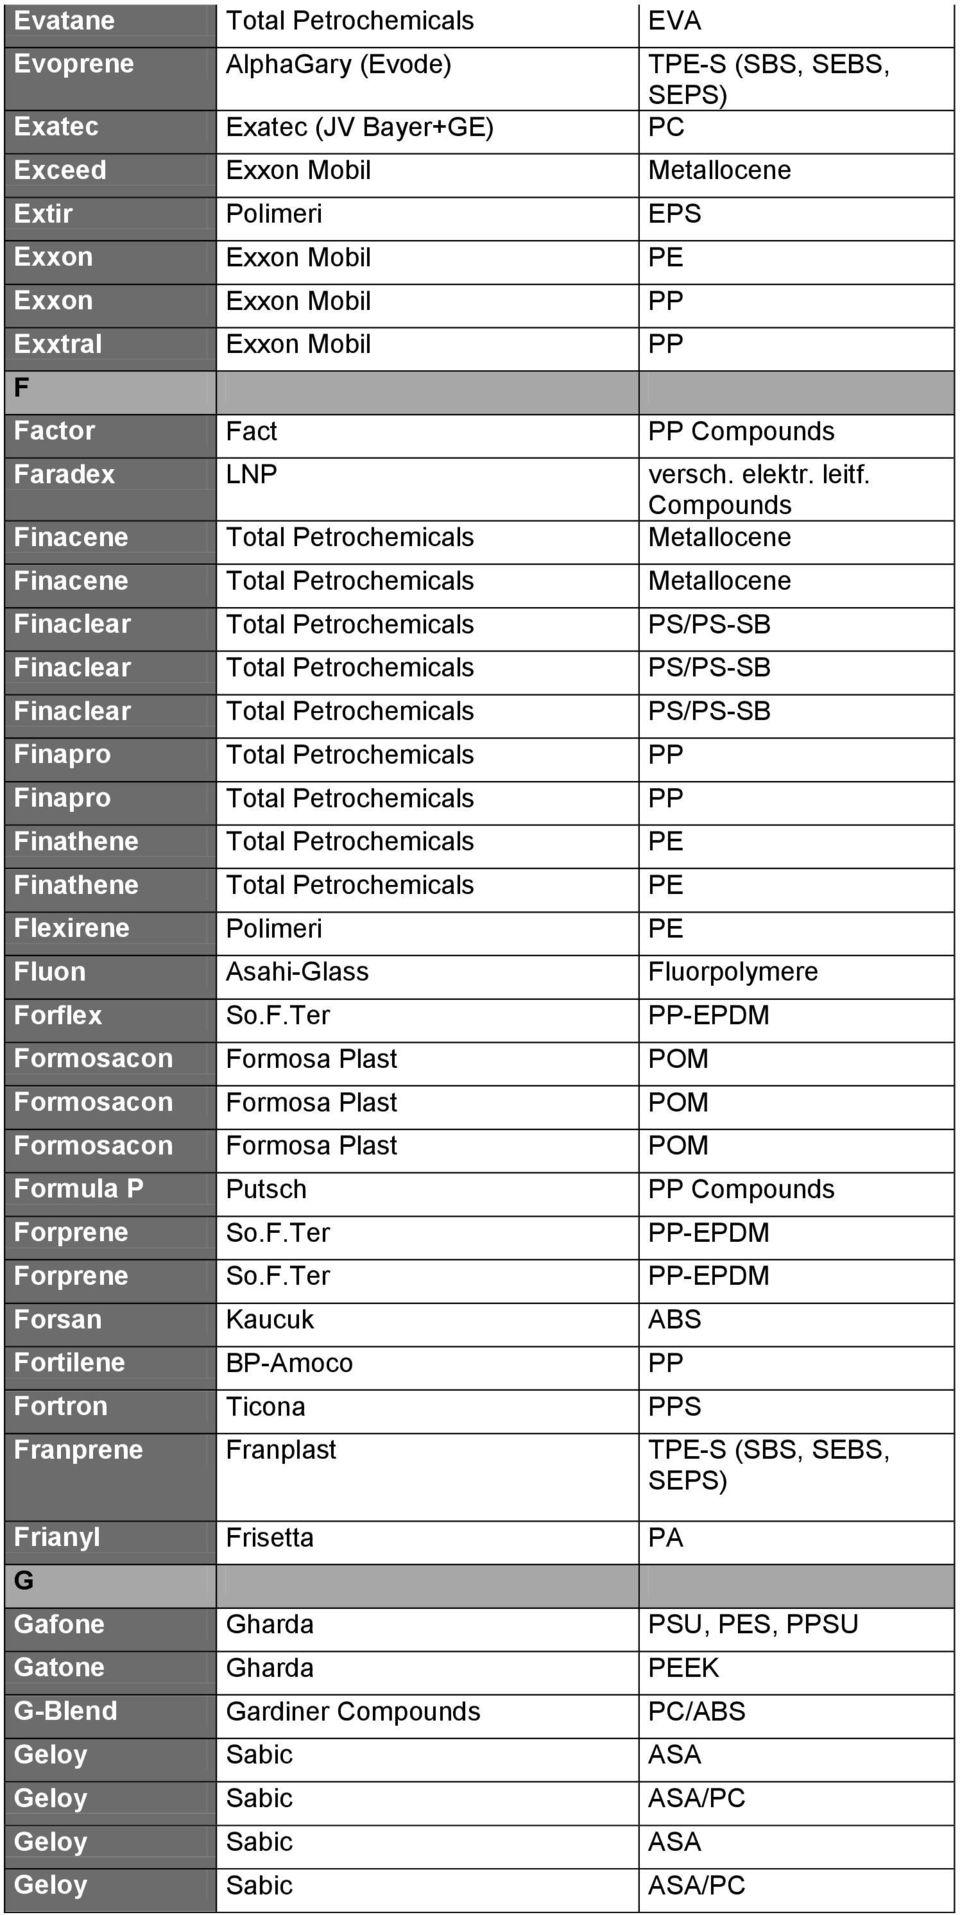 Compounds Finacene Total Petrochemicals Metallocene Finacene Total Petrochemicals Metallocene Finaclear Total Petrochemicals PS/PS-SB Finaclear Total Petrochemicals PS/PS-SB Finaclear Total